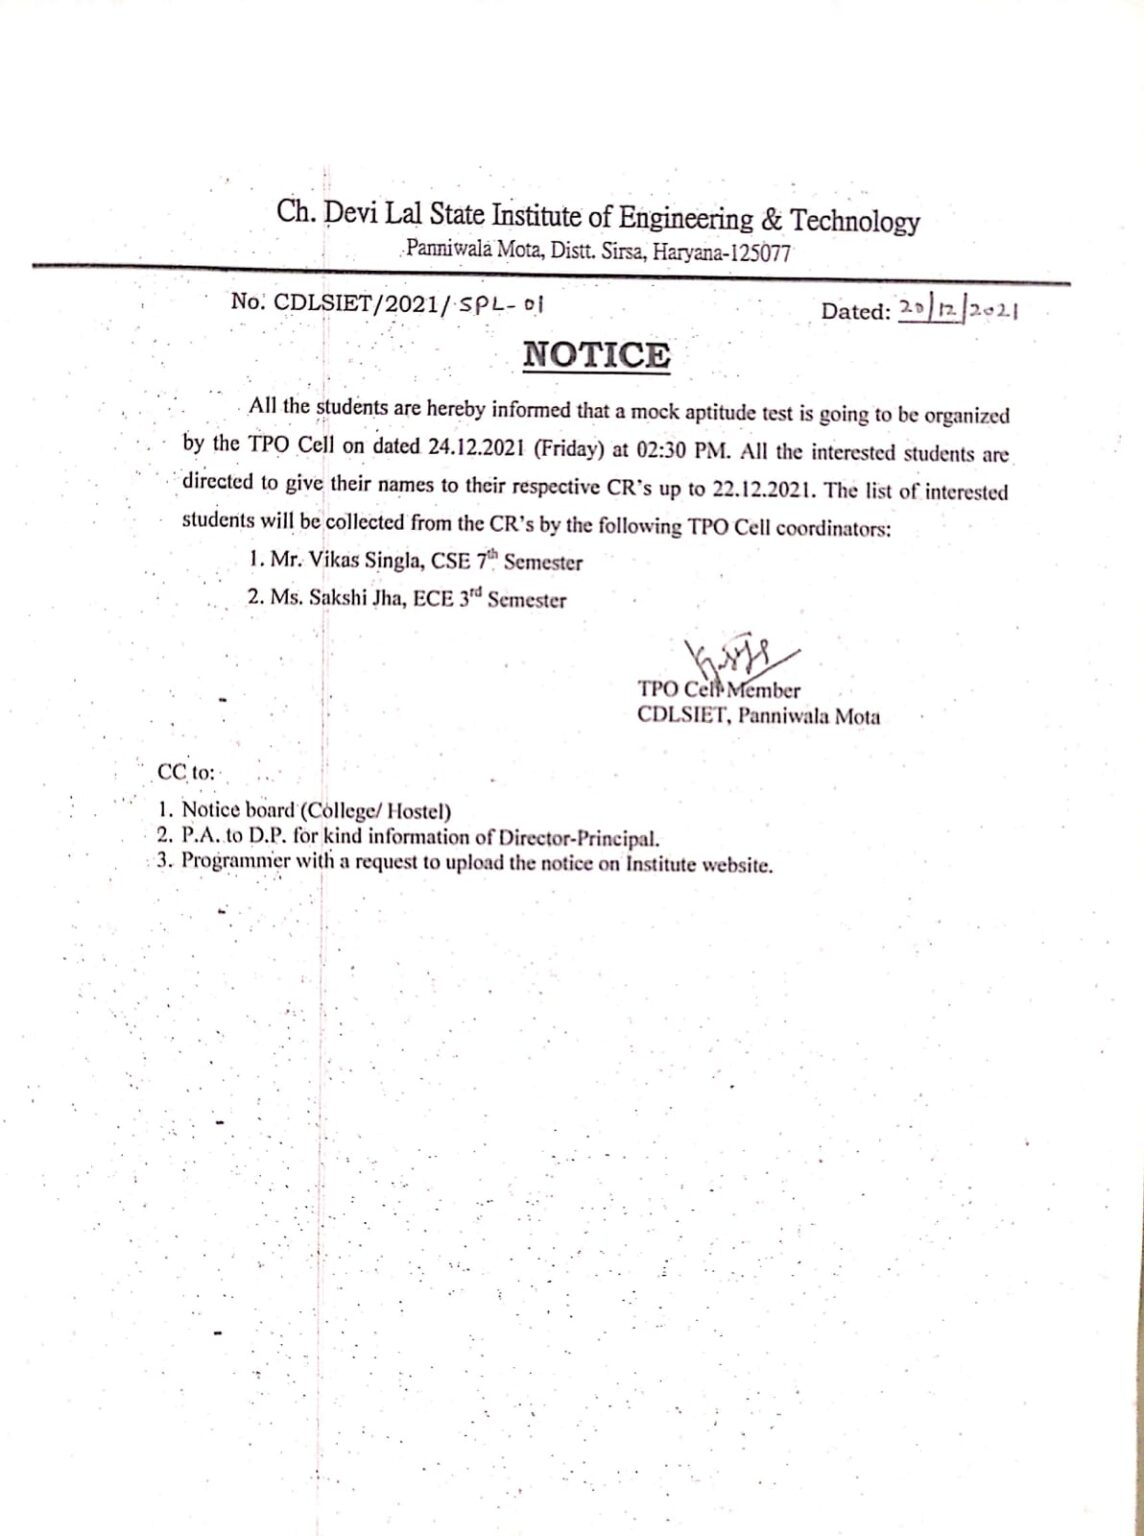 notice-regarding-mock-aptitude-test-to-be-organized-on-24-12-2021-ch-devi-lal-state